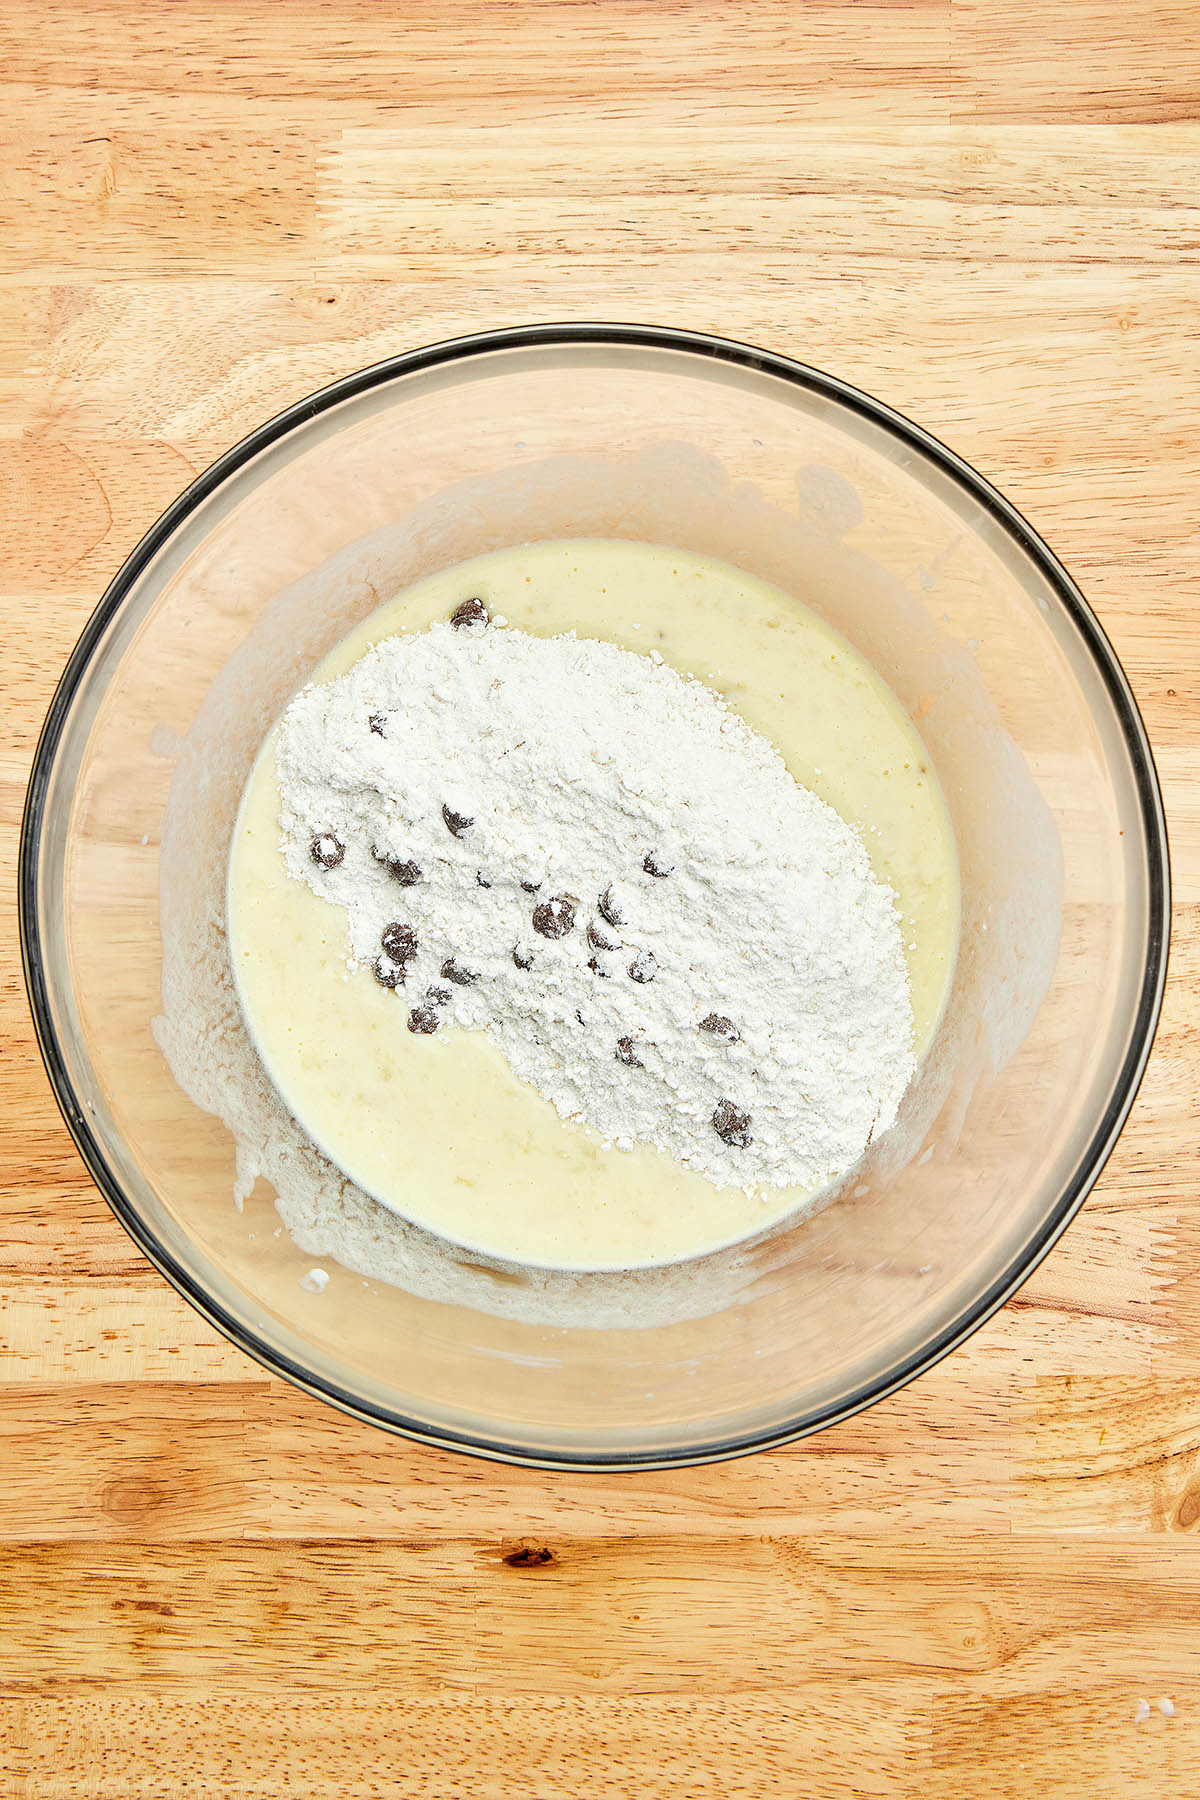 Wet and dry ingredients, unmixed, in a large glass bowl.